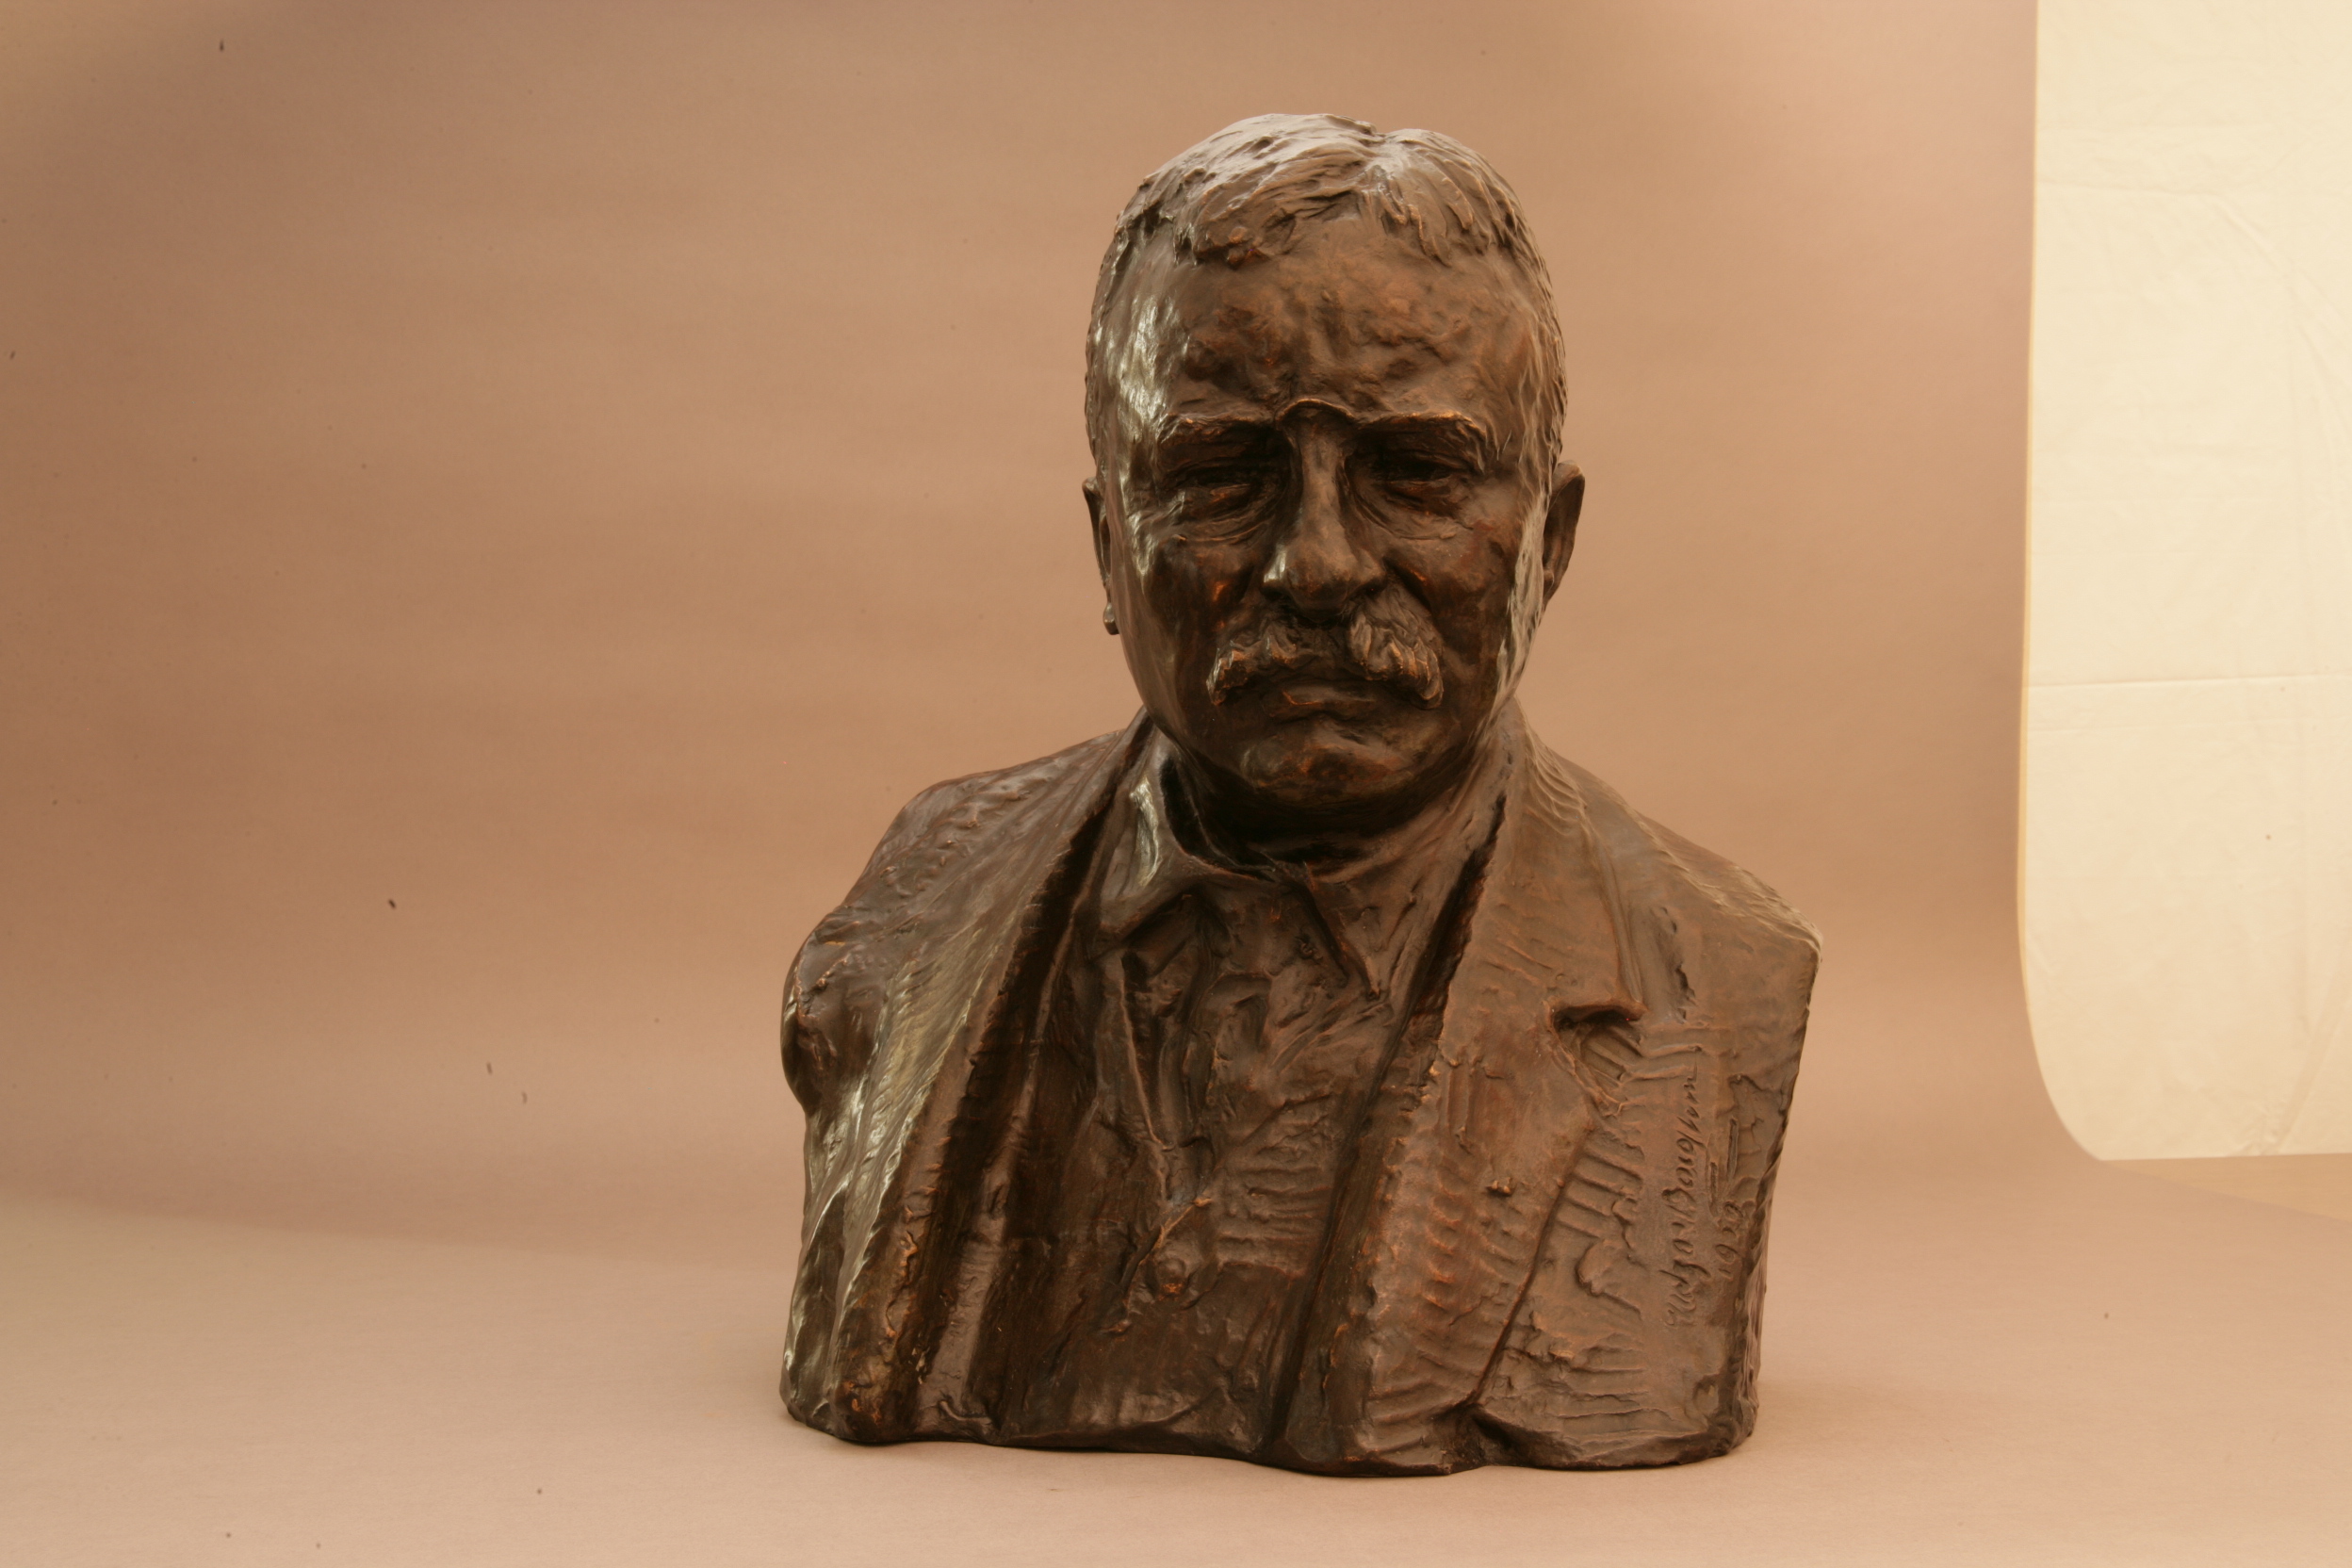 A bronze bust of Theodore Roosevelt. He is wearing pince-nez glasses and a suit. He has a mustache and a serious expression. 